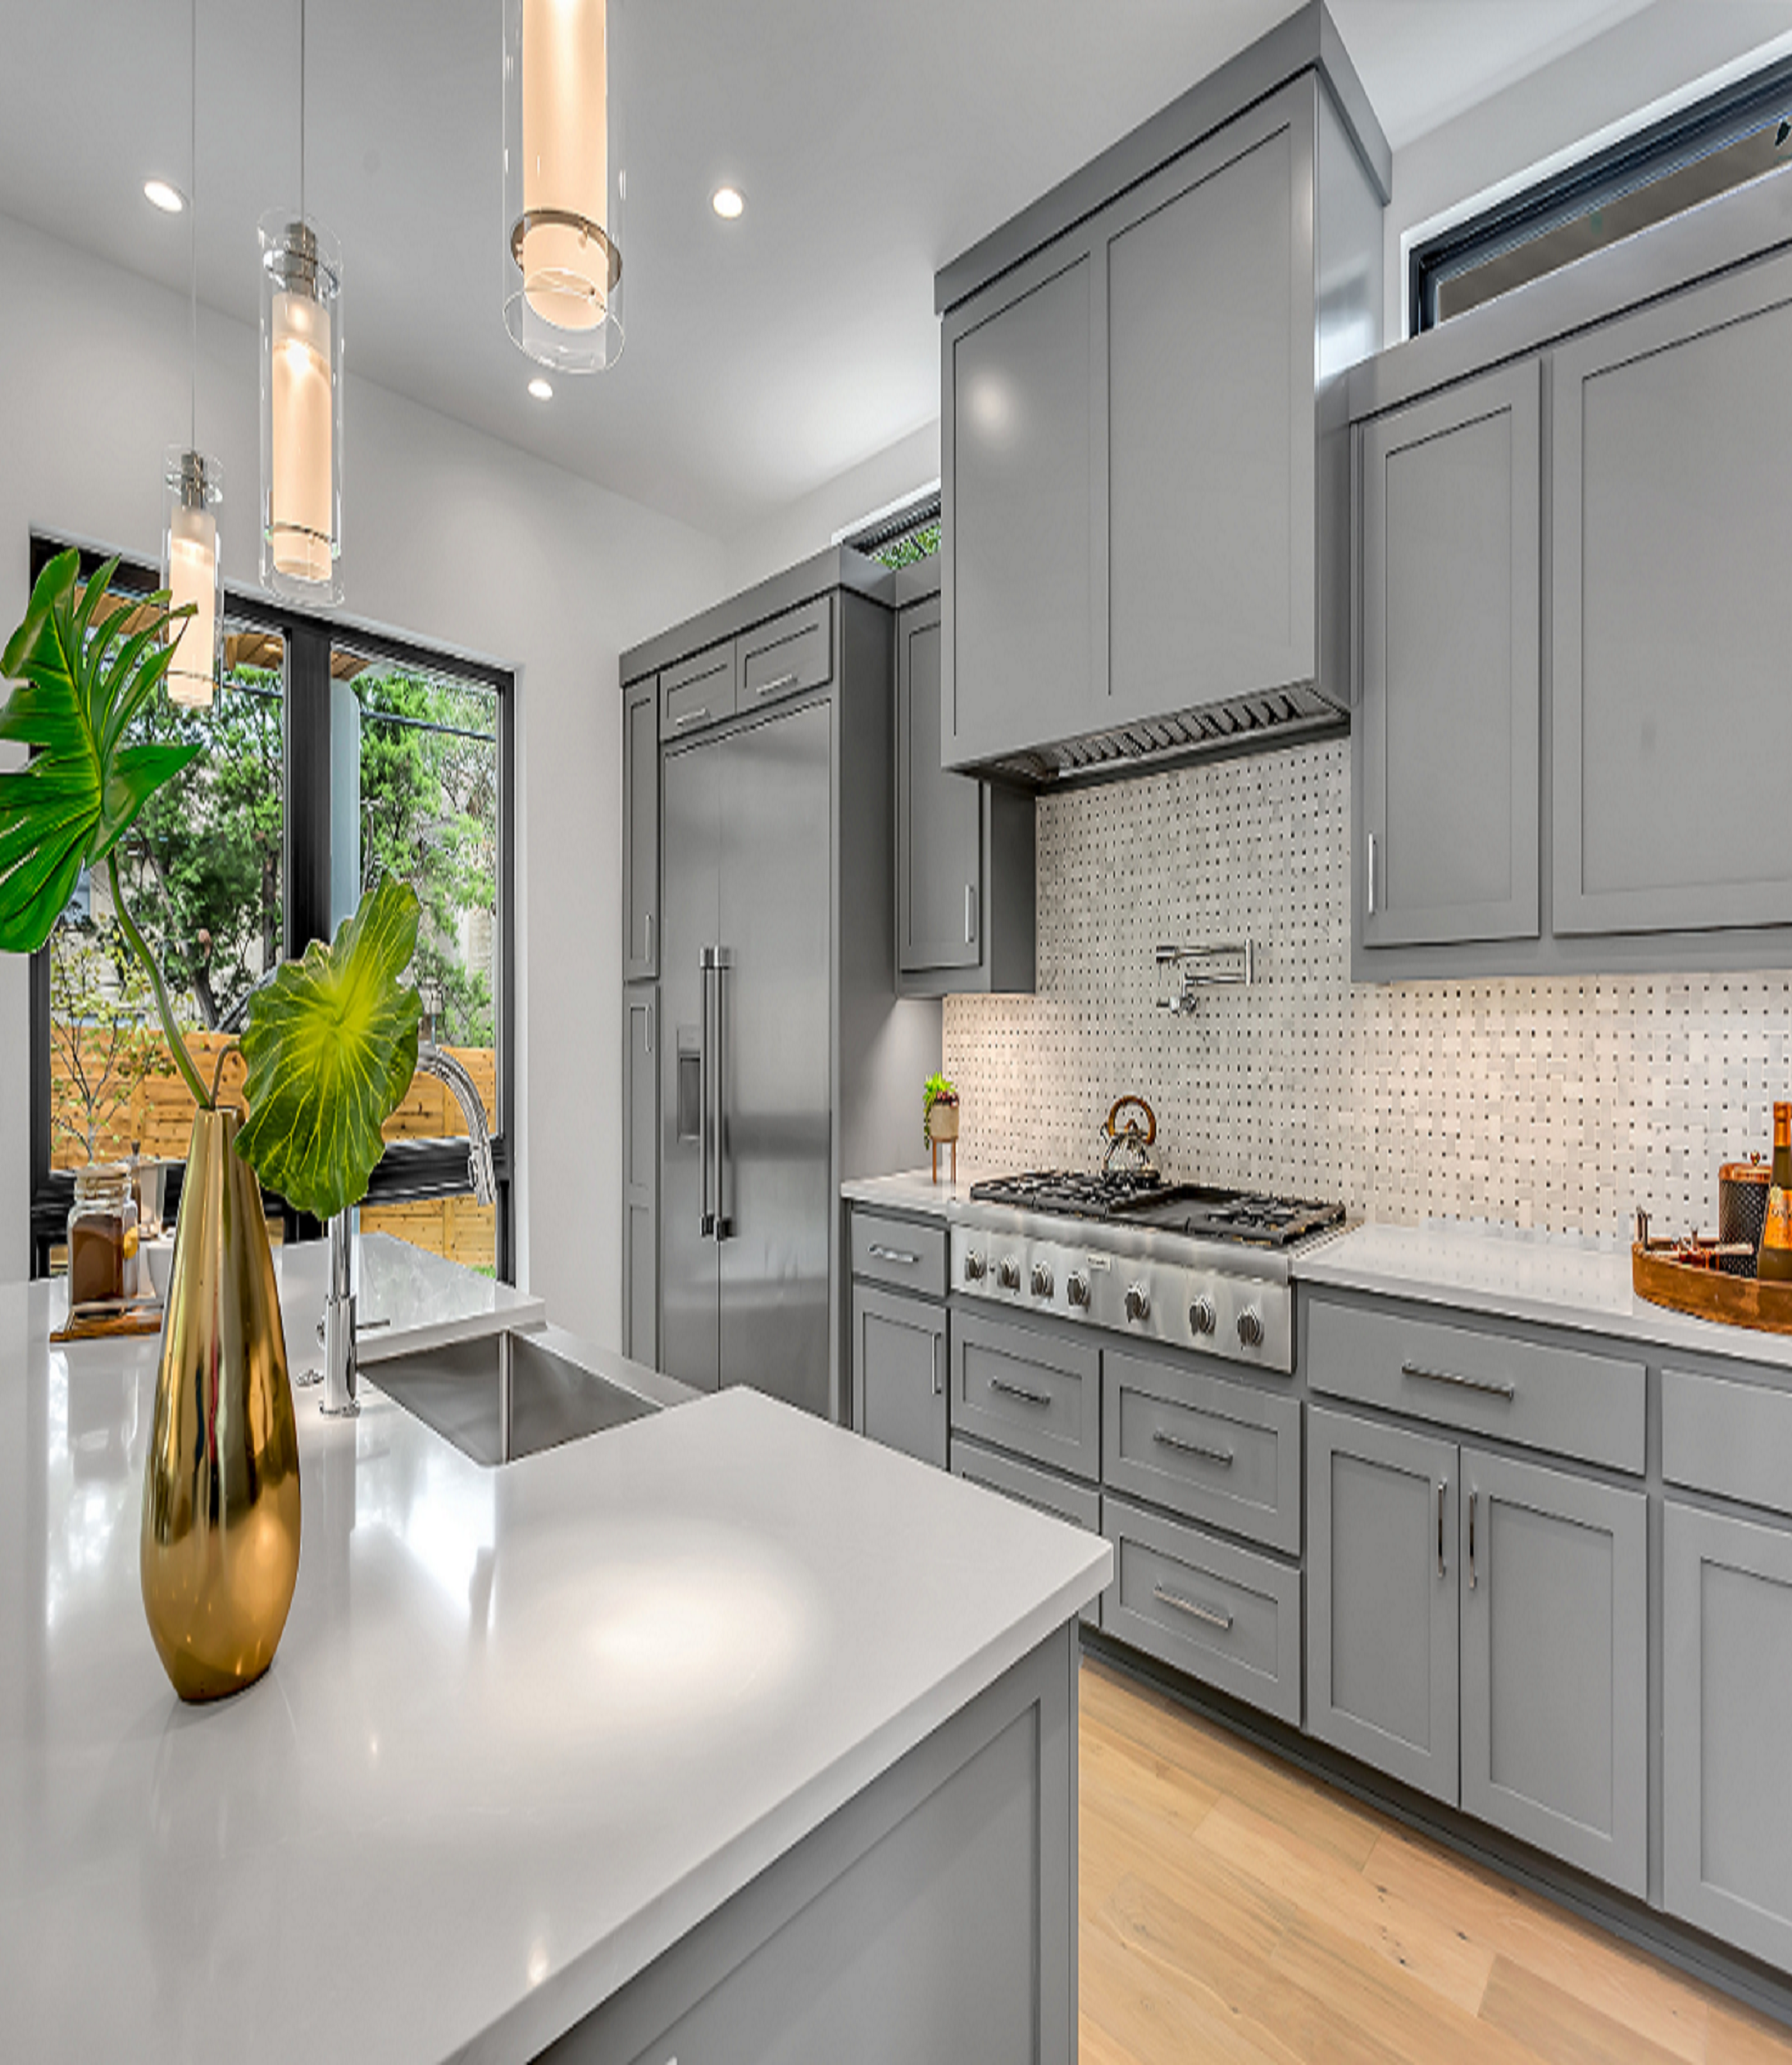 Hereâ€™s why you should choose quartz countertops for your kitchen Main Image